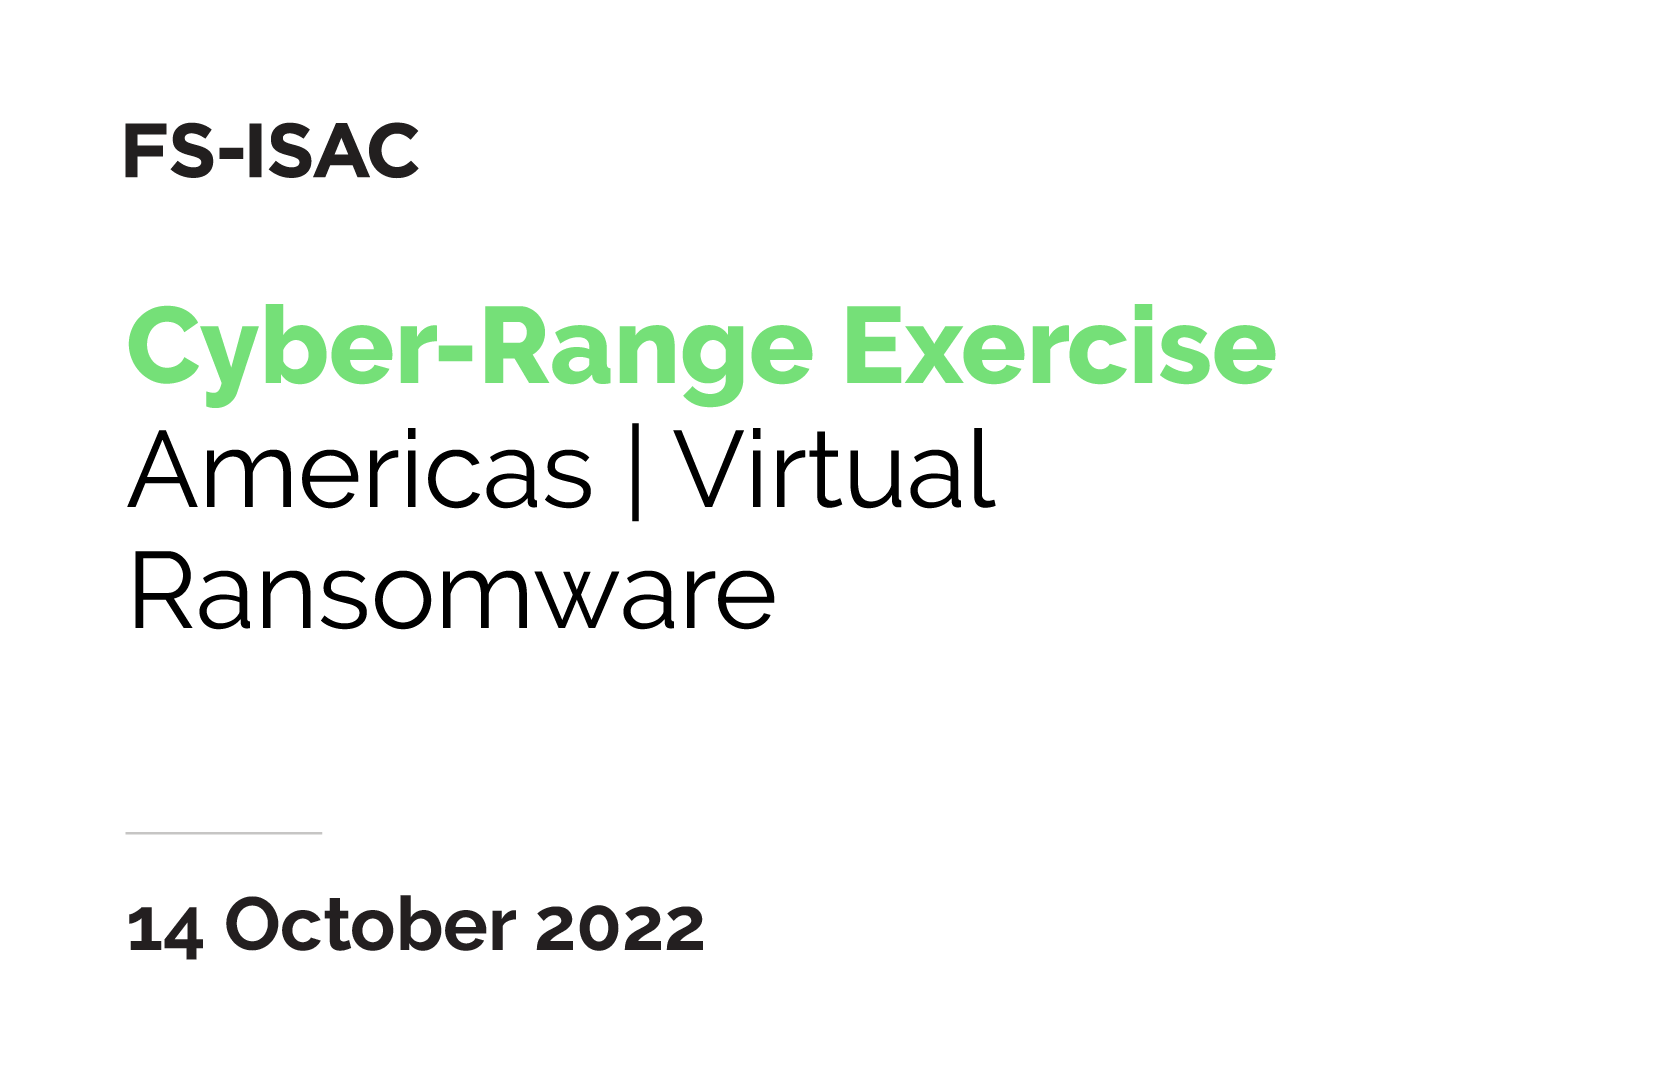 FS-ISAC Cyber Range Exercise | Ransomware Americas | October 2022